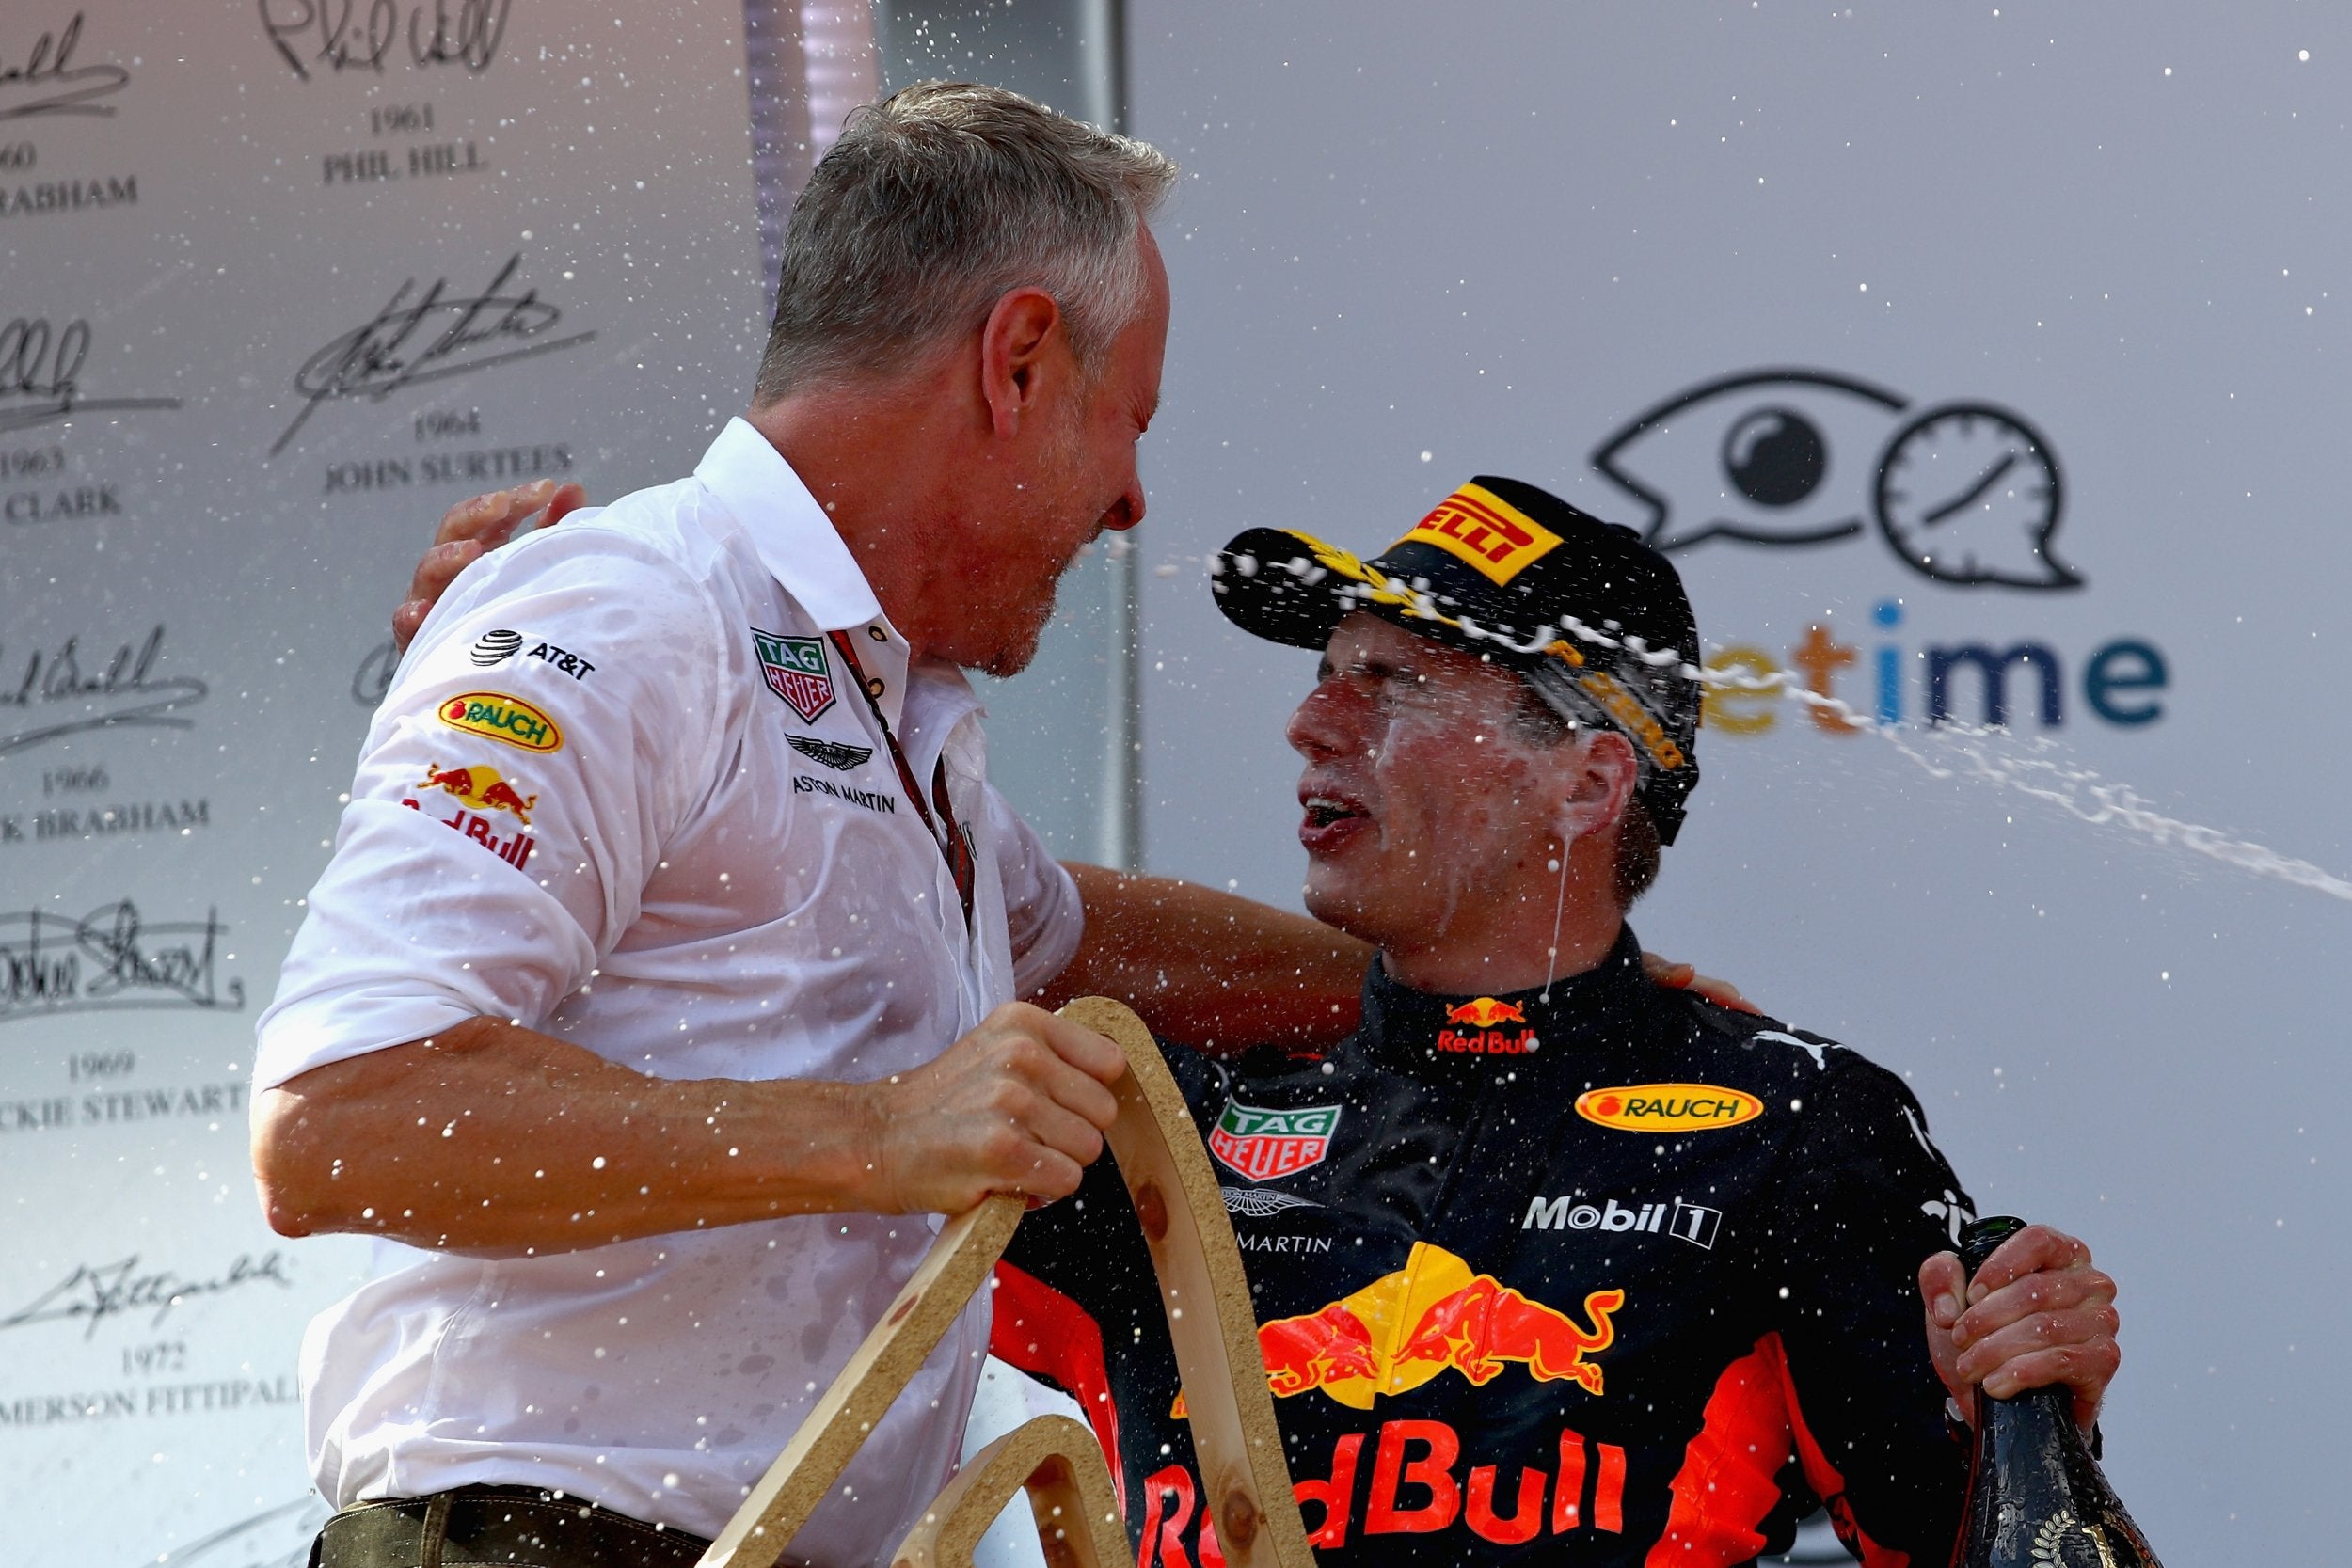 Verstappen's victory gave Red Bull their first win around their home circuit